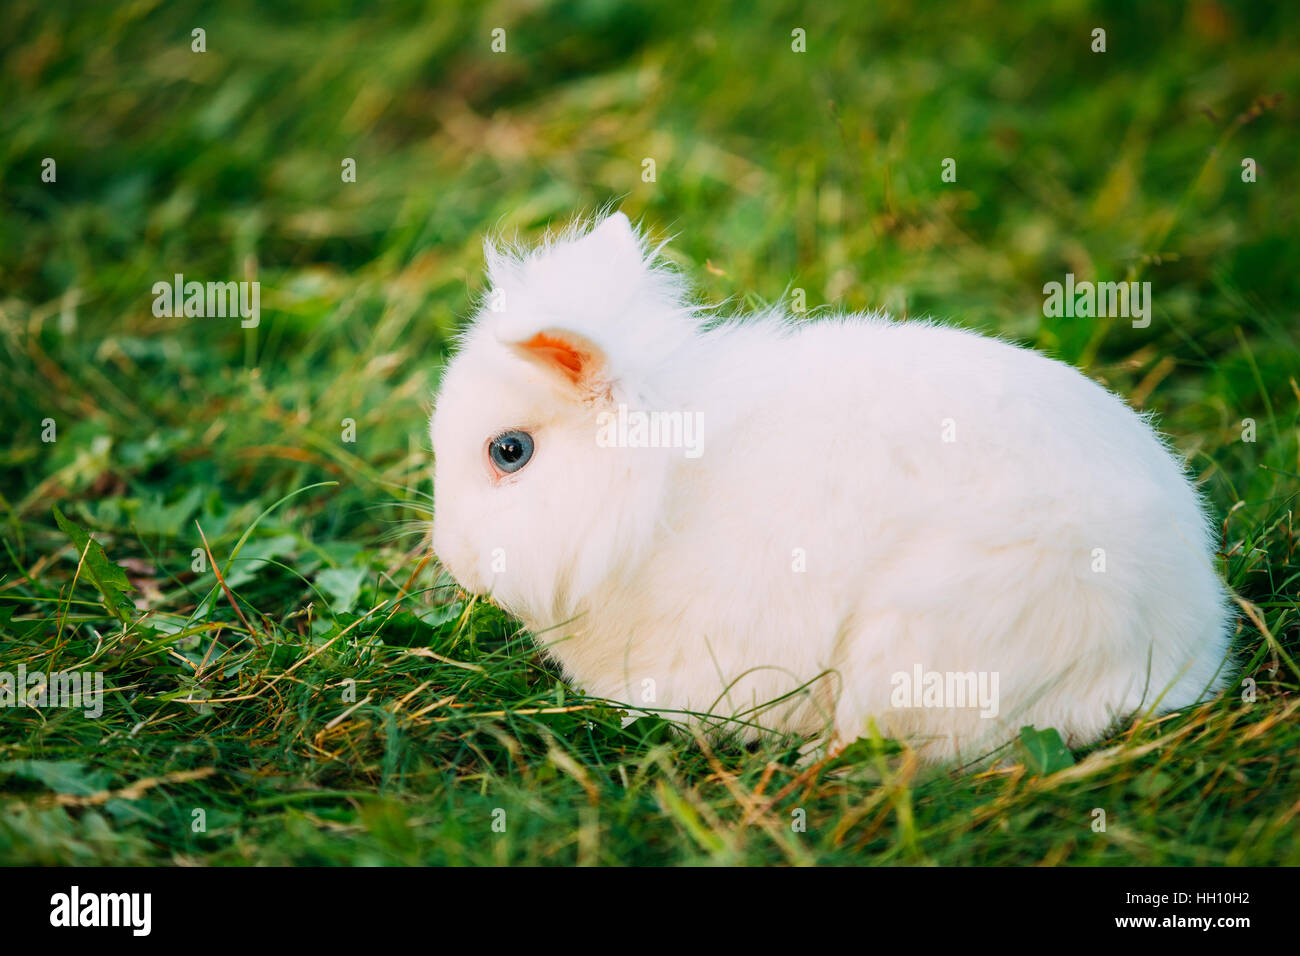 Close Profile Of Cute Dwarf Lop-Eared Decorative Miniature Snow-White Fluffy Rabbit Bunny Mixed Breed With Blue Eyes Sitting In Bright Green Grass In Stock Photo